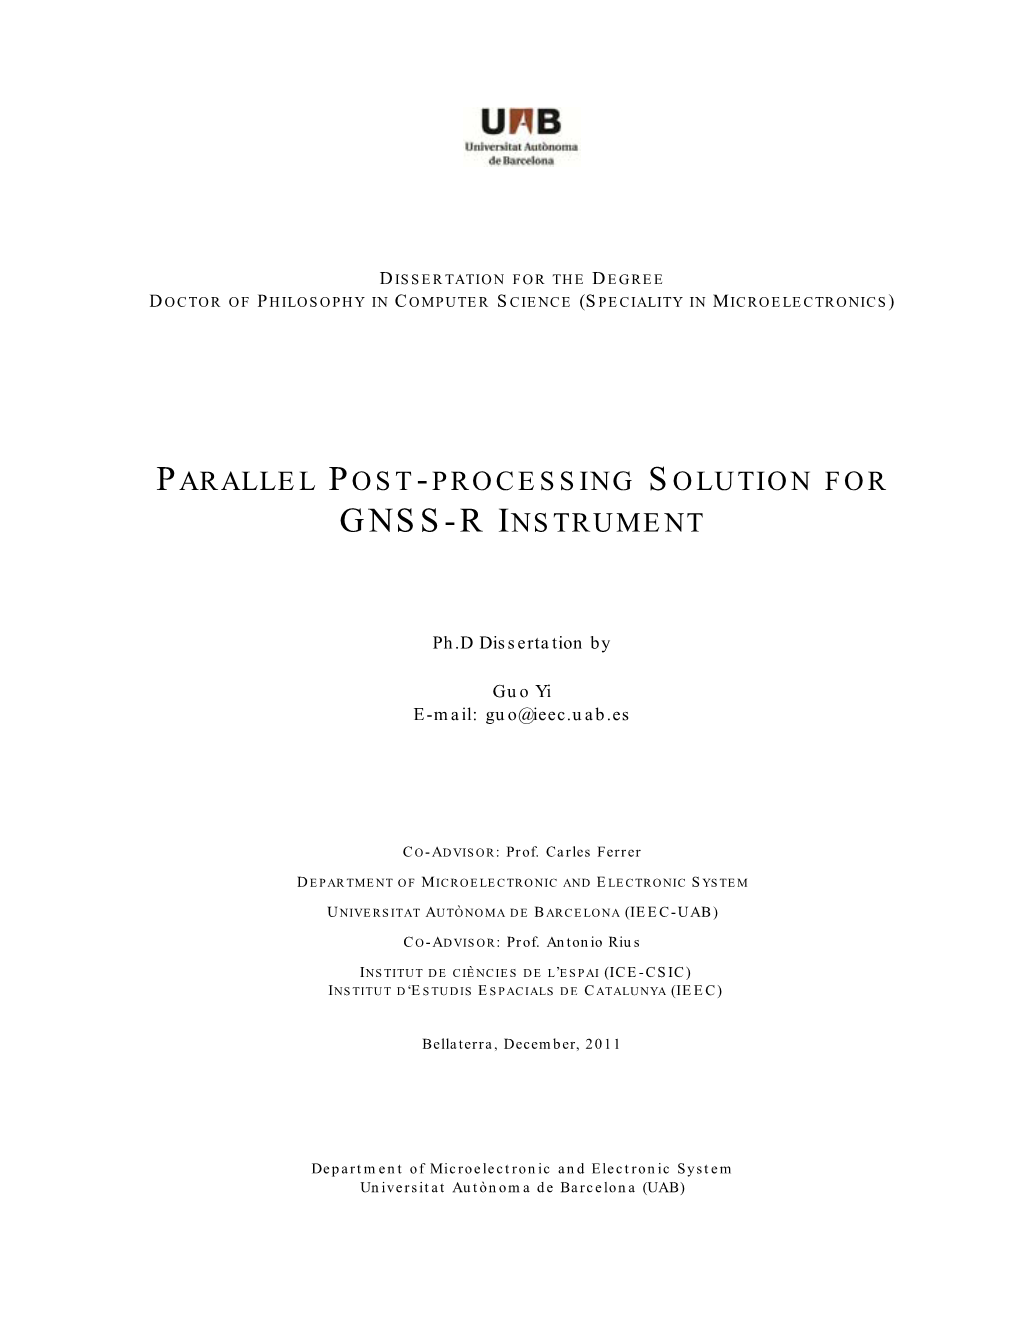 Parallel Post-Processing Solution for Gnss-R Instrument